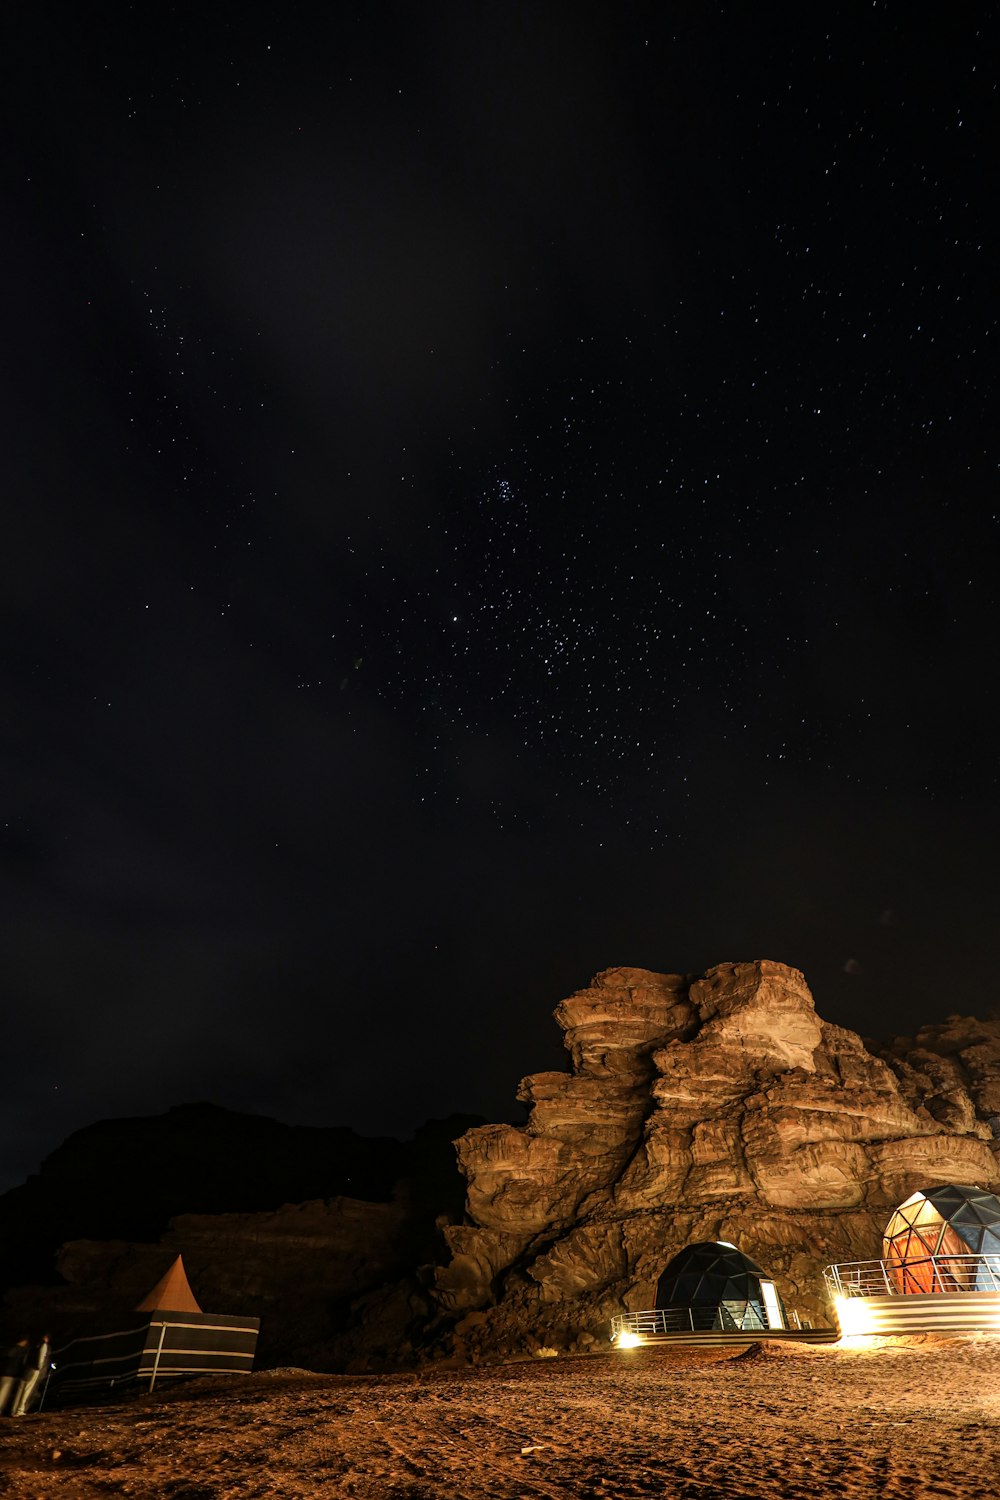 a night time scene of a rocky mountain